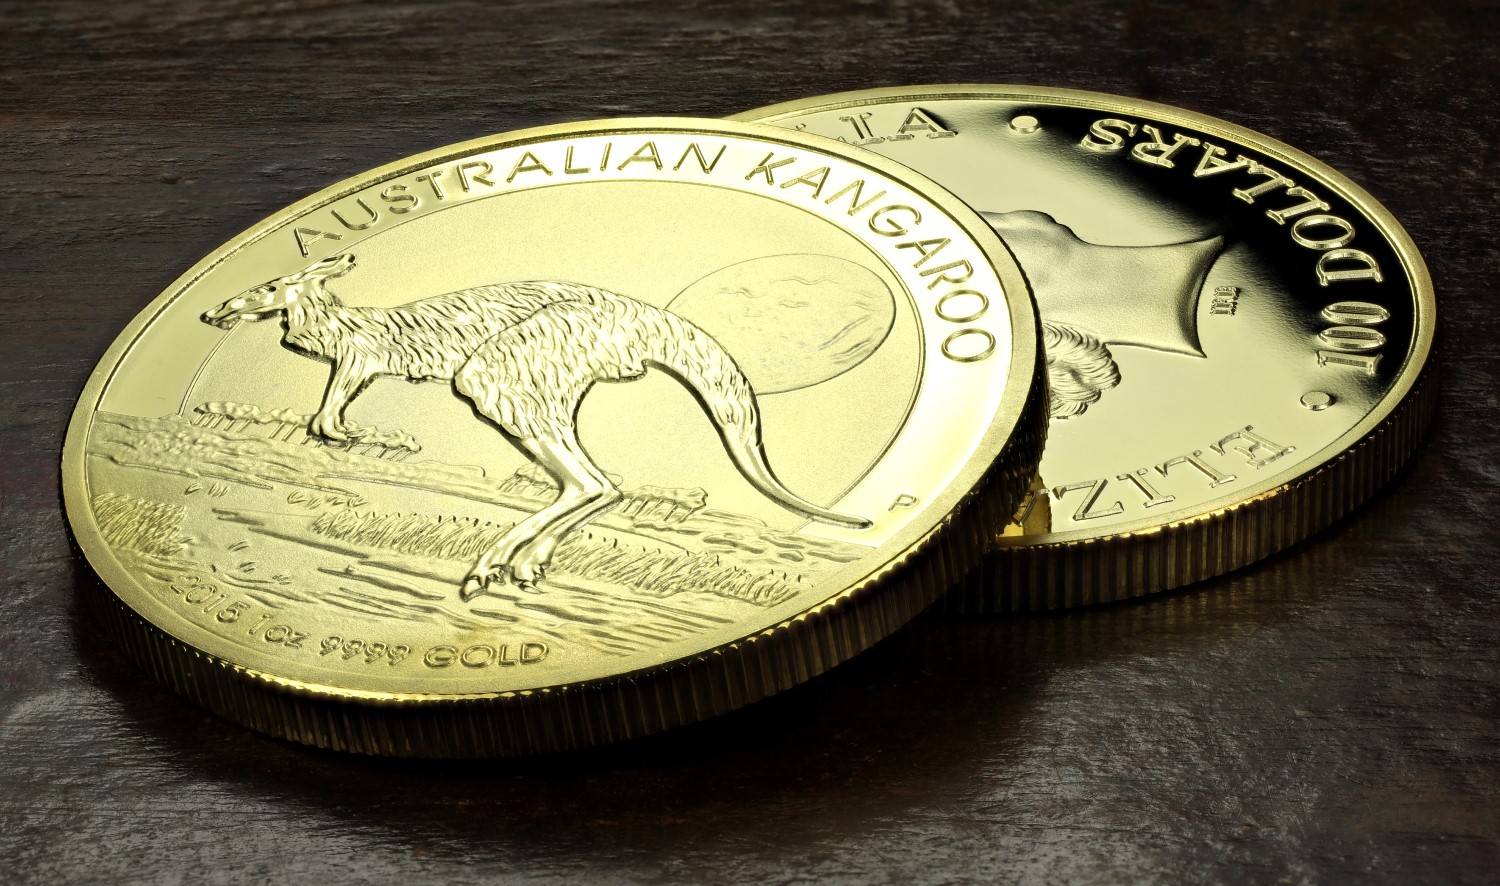 Australia’s Gold Mint Is Backing A Crypto Token Based On Ethereum